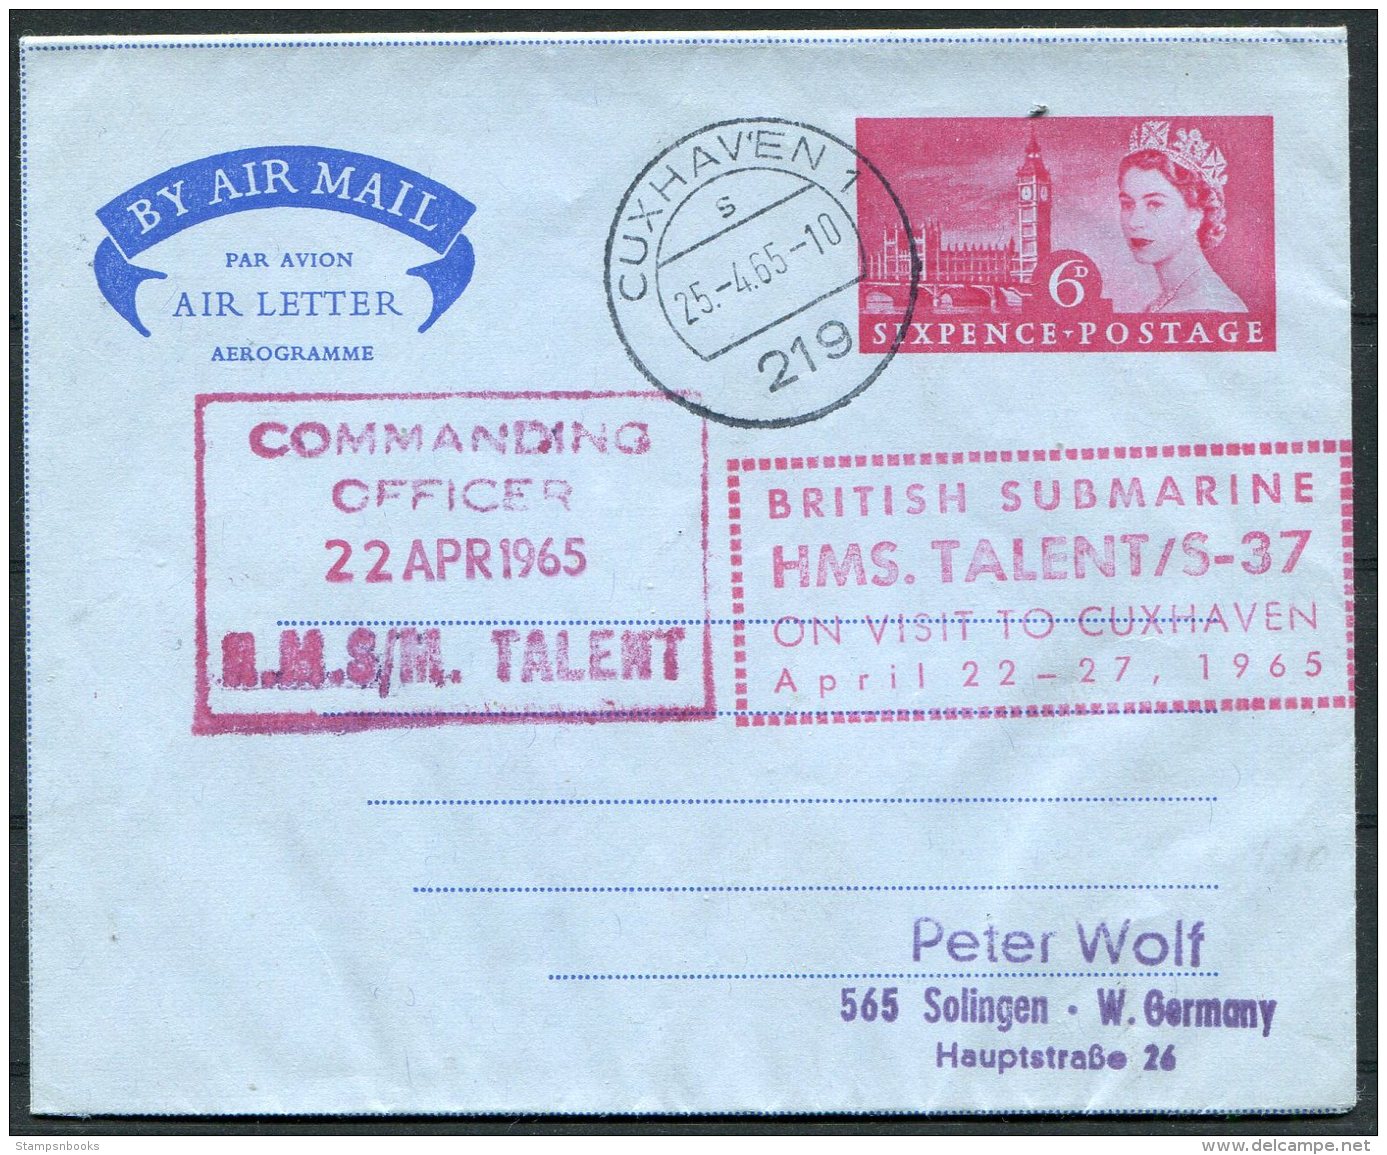 1965 GB Parliament Airletter, Cuxhaven Germany, H.M.S. TALENT British Royal Navy Submarine - Covers & Documents